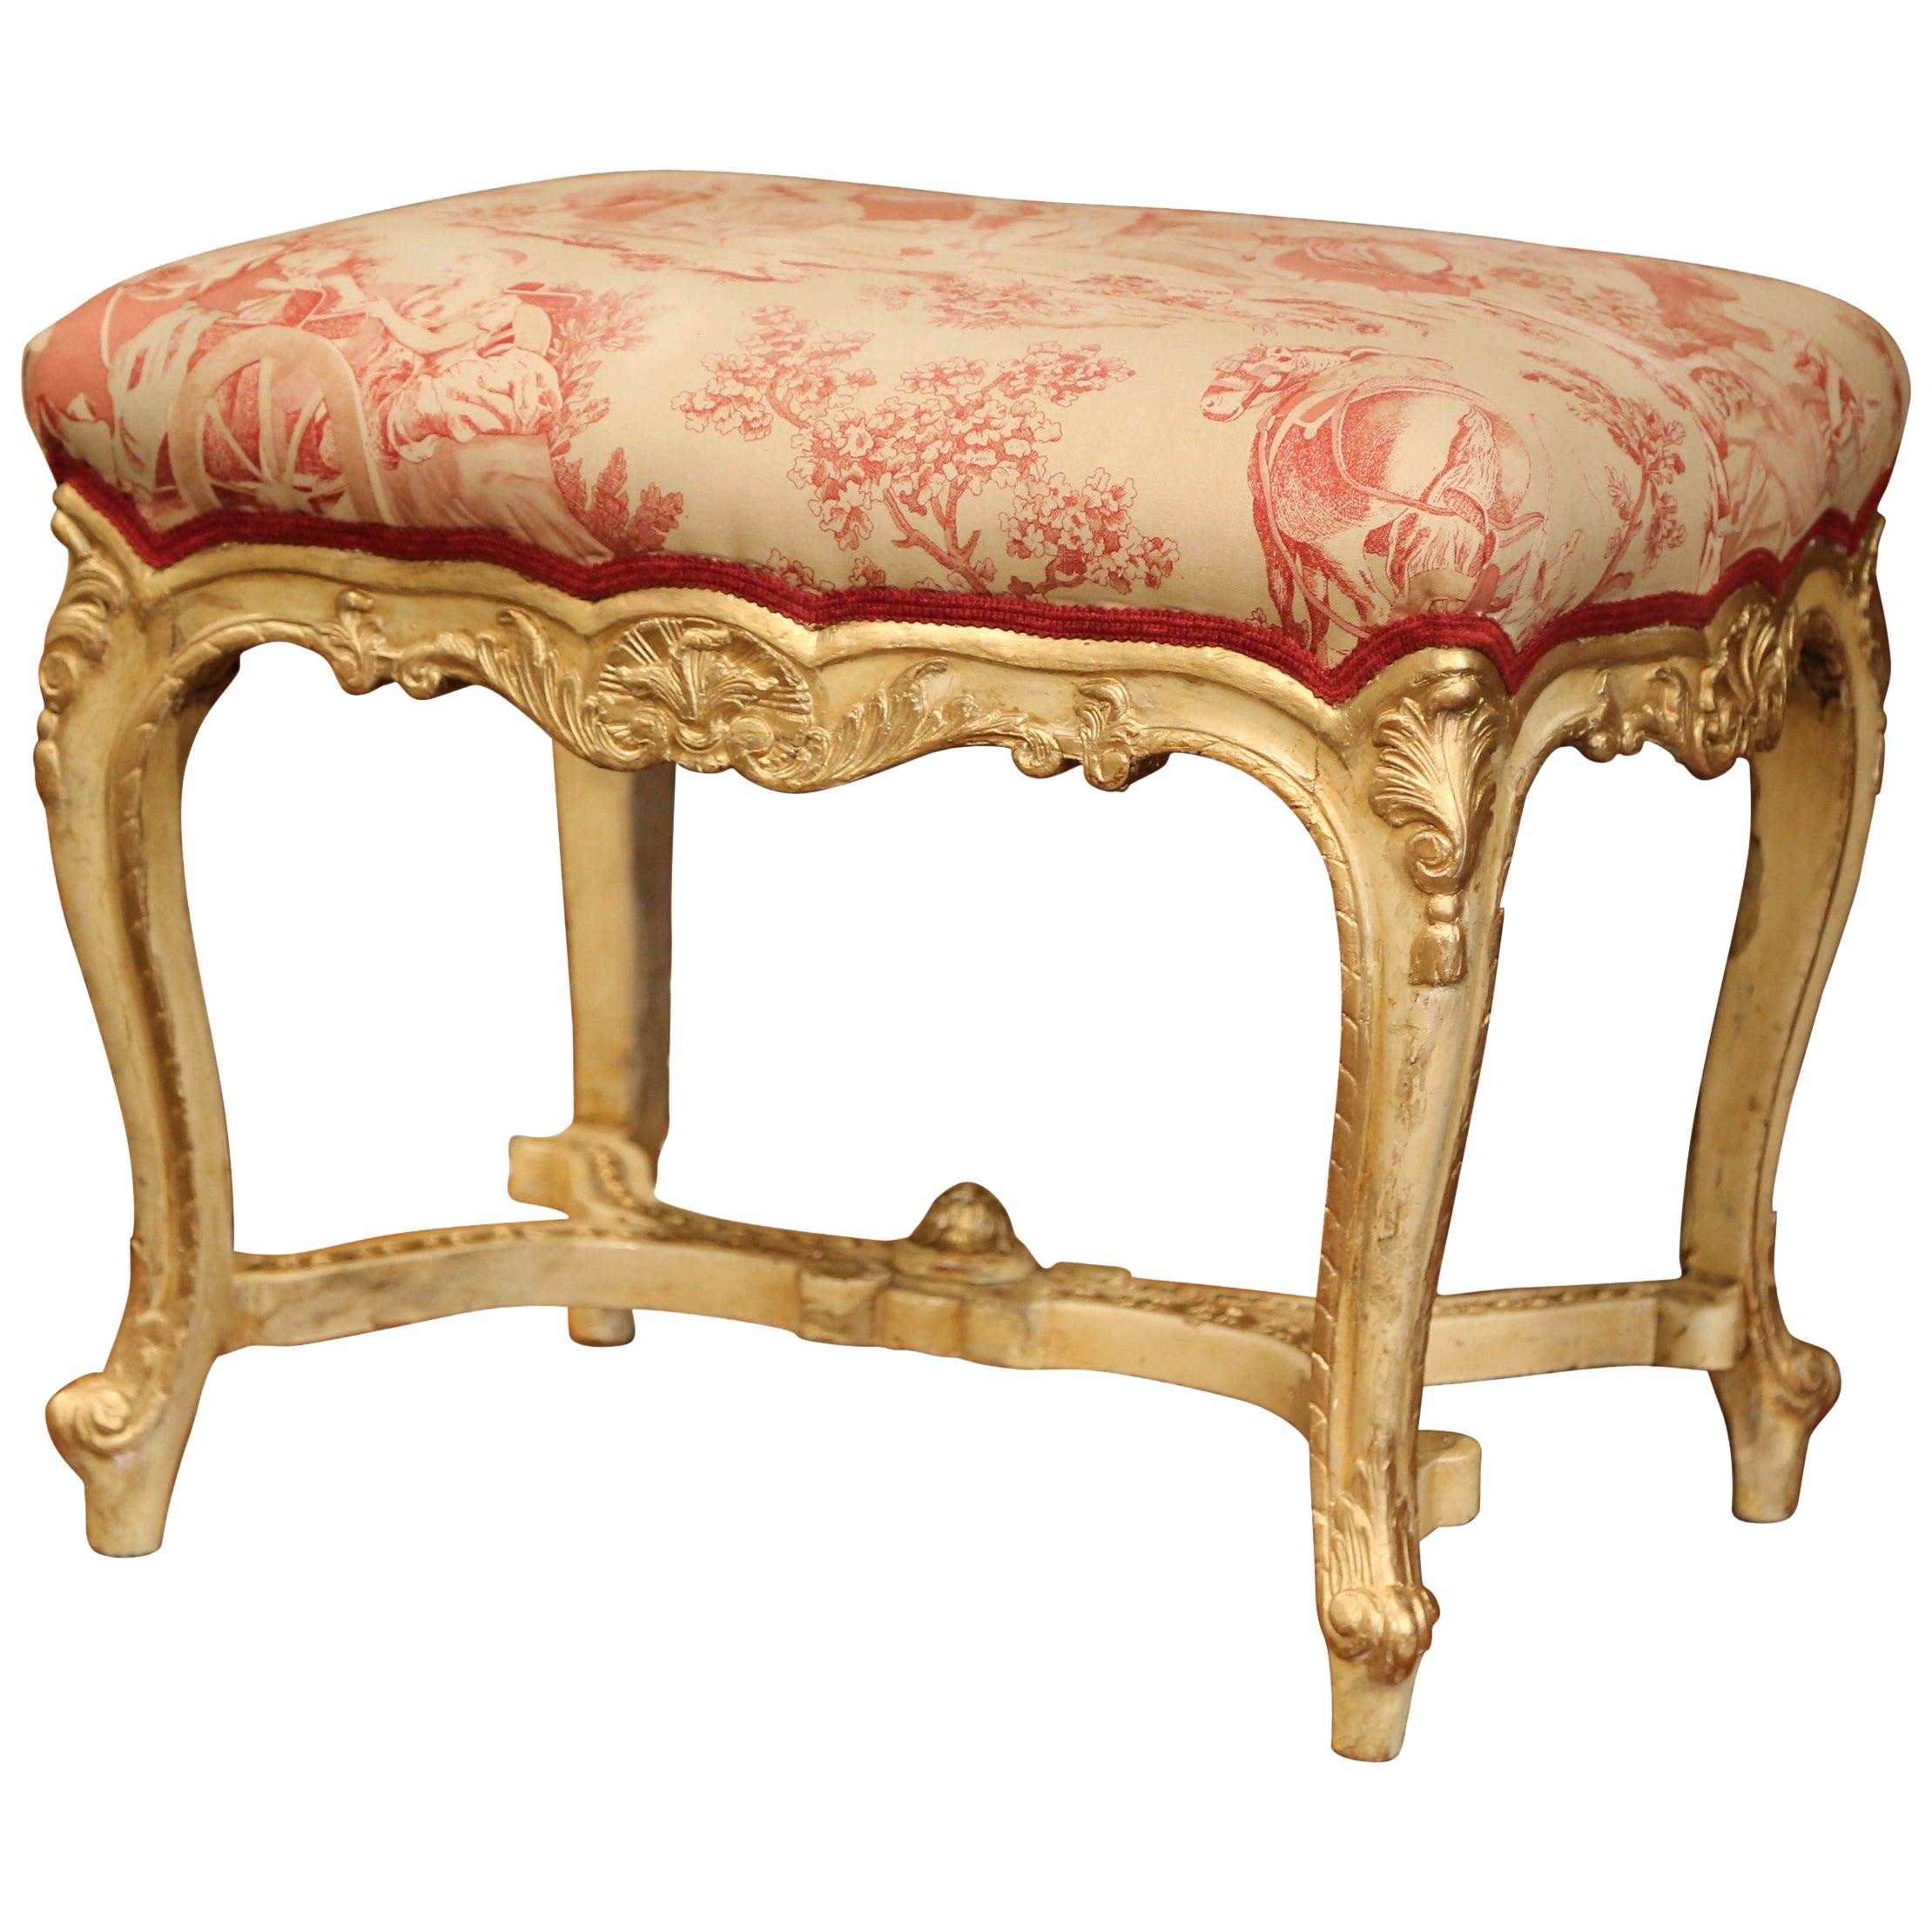 19th Century French Louis XV Carved Painted and Gilt Stool with Vintage Toile